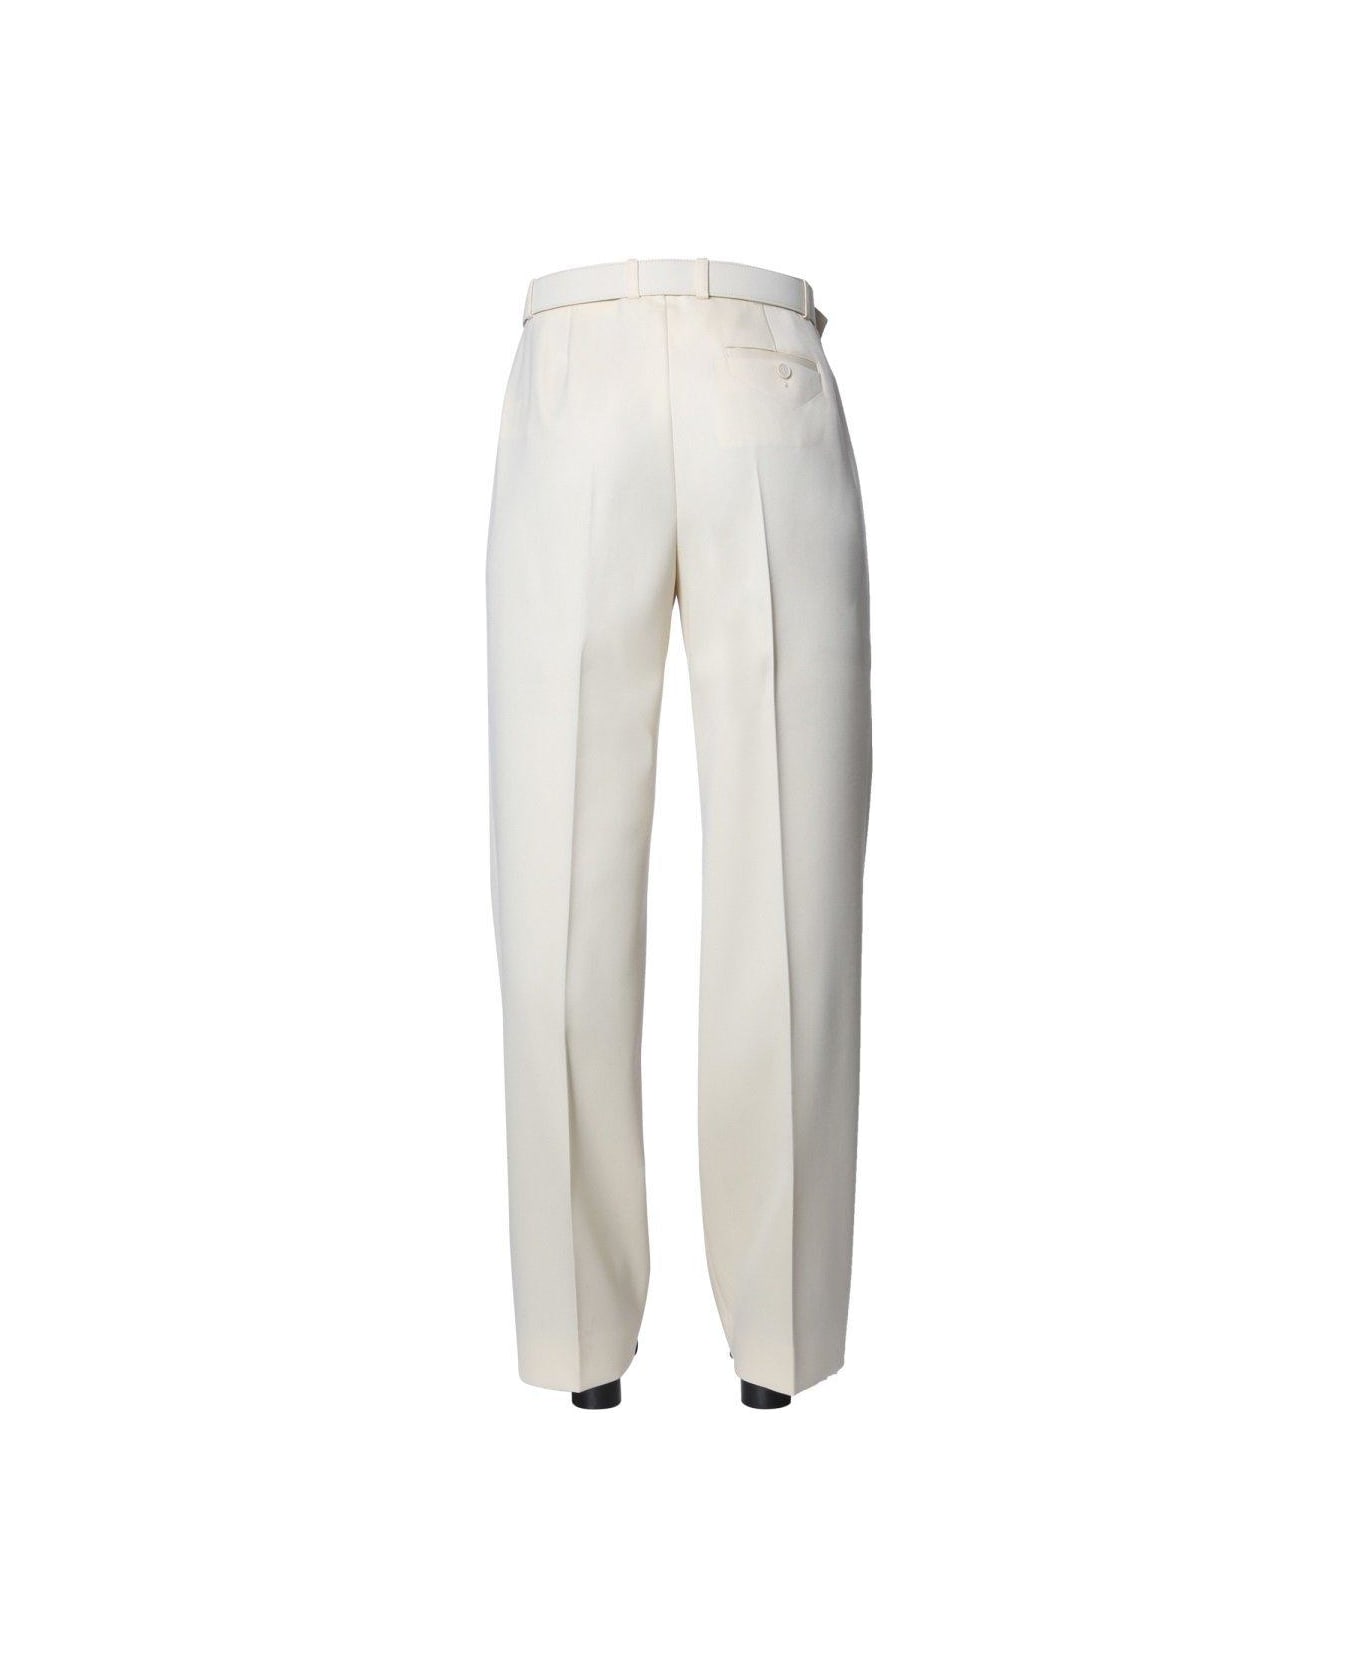 Givenchy Belted Tailored Pants - WHITE ボトムス